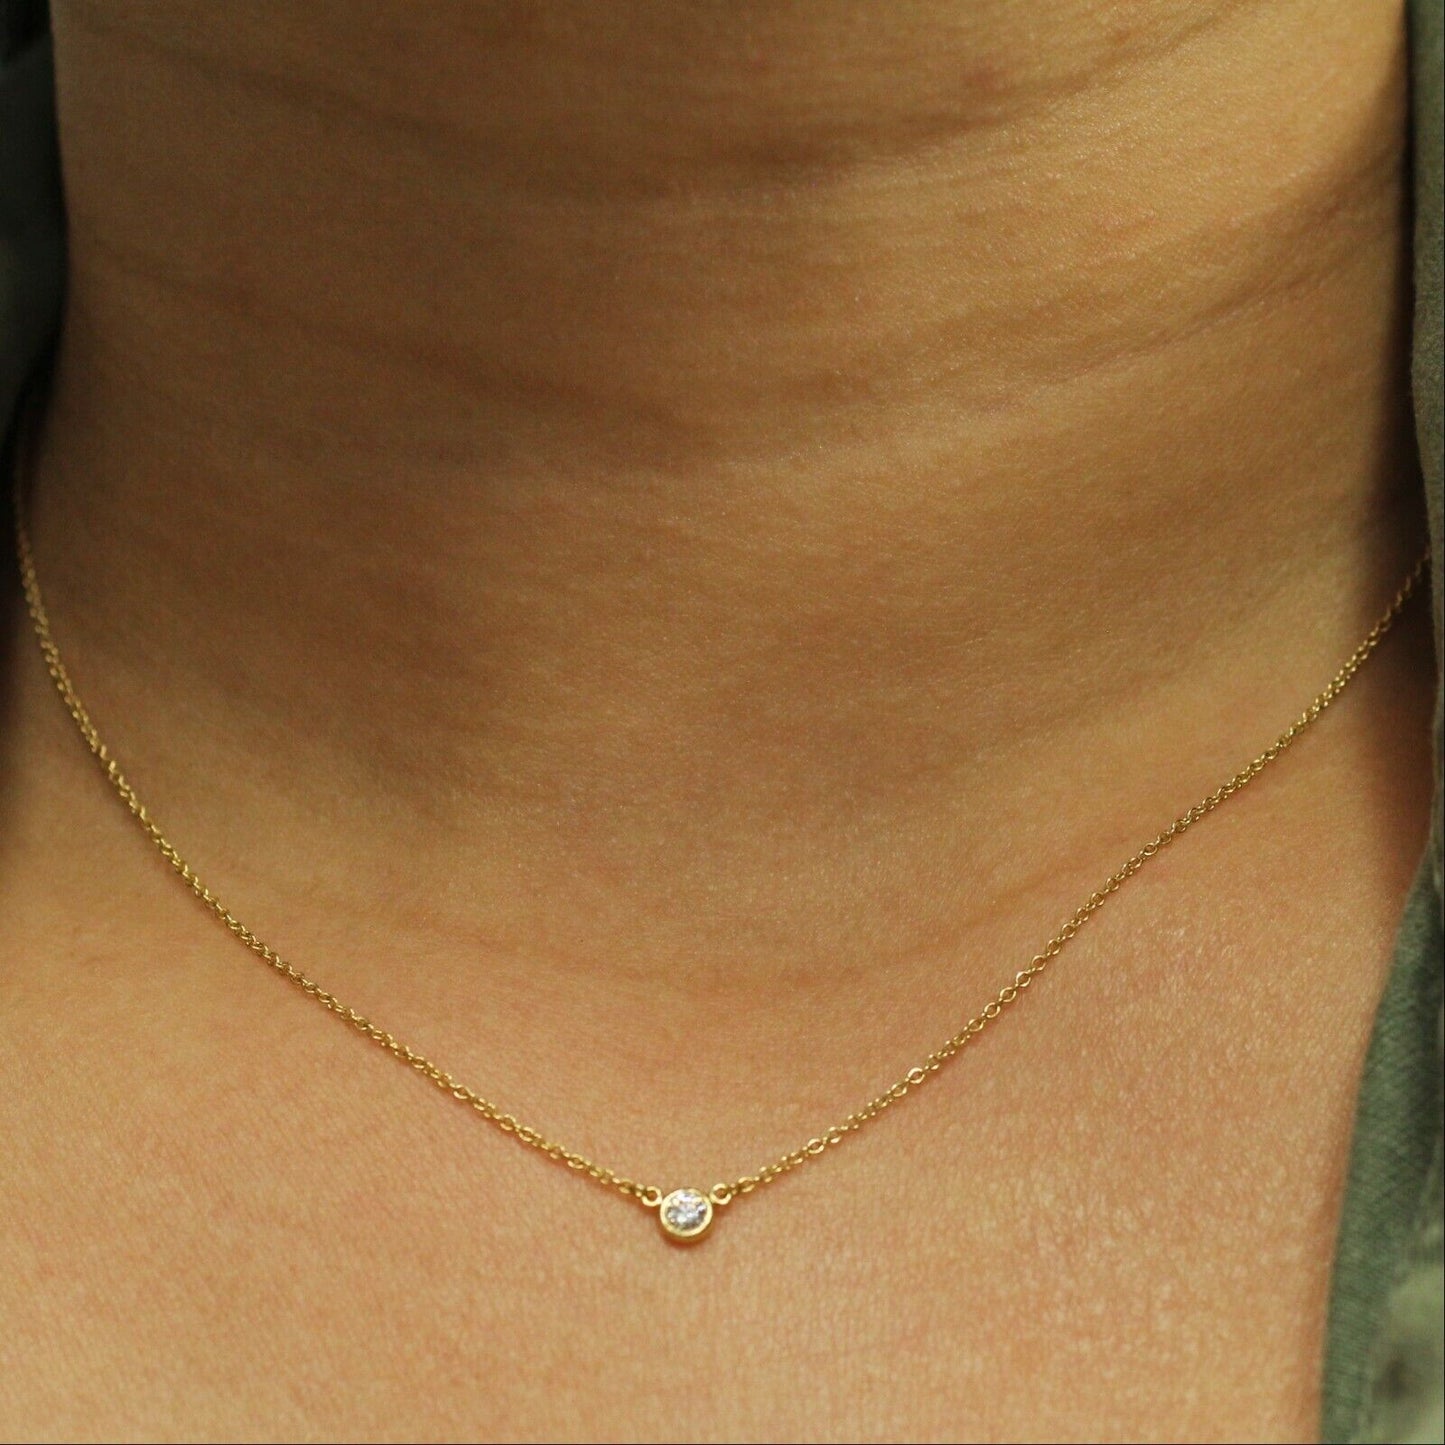 Tiffany & Co Diamond by the Yard Necklace in 18k Yellow Gold 16"inches